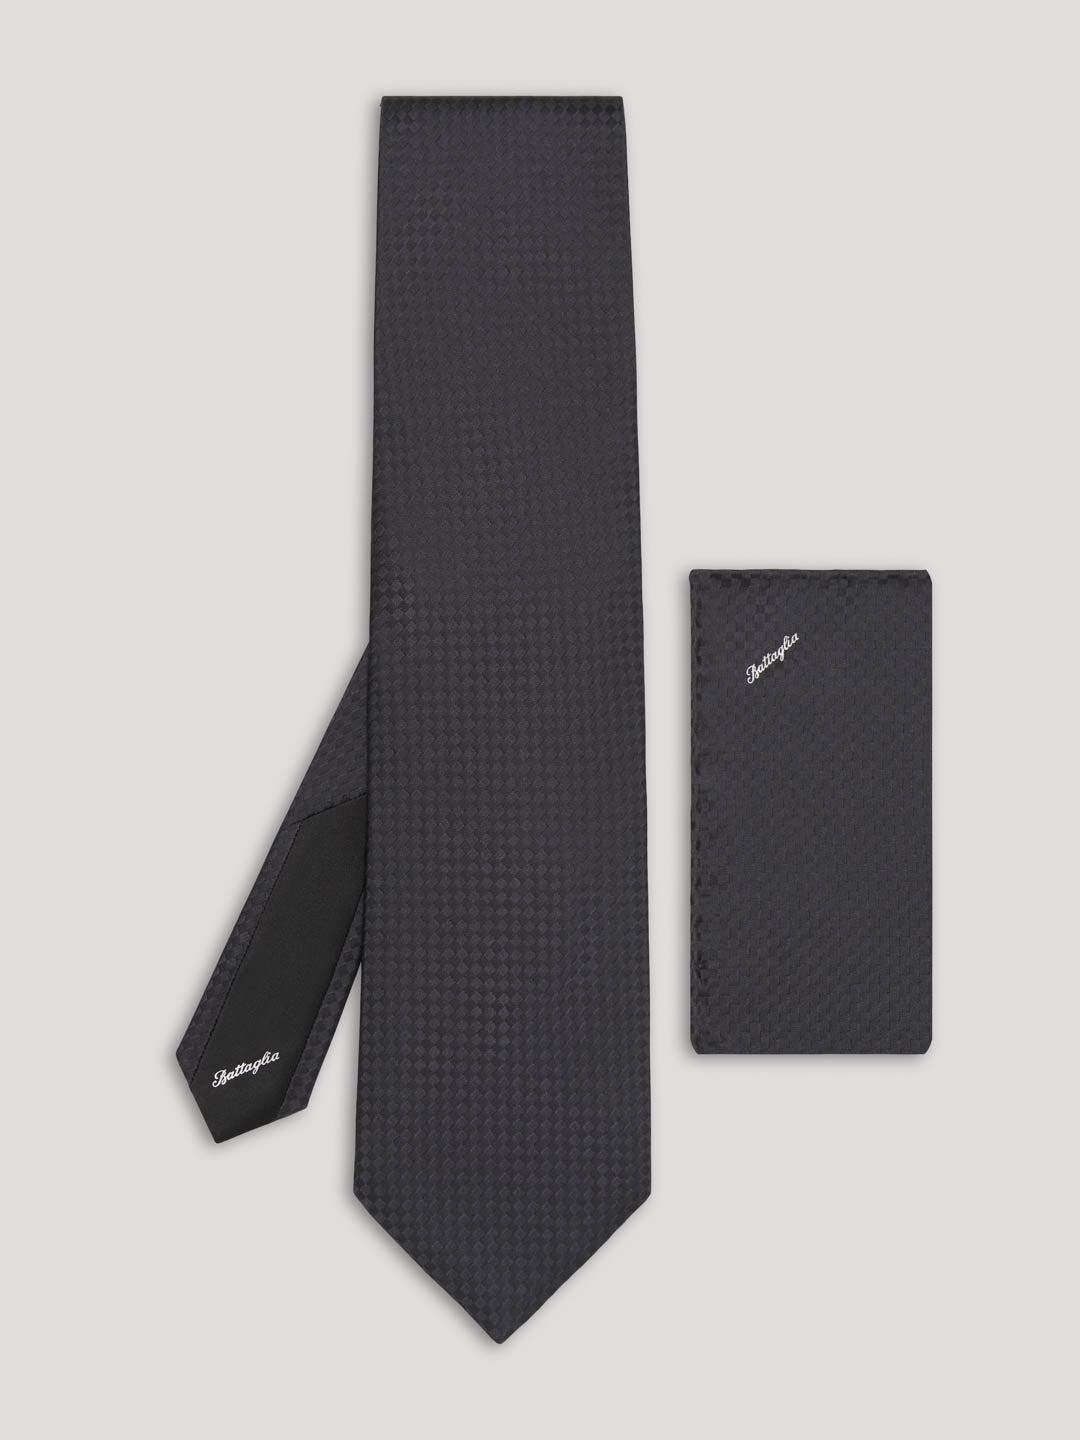 Black tone on tone check pattern silk tie with matching handkerchief. 